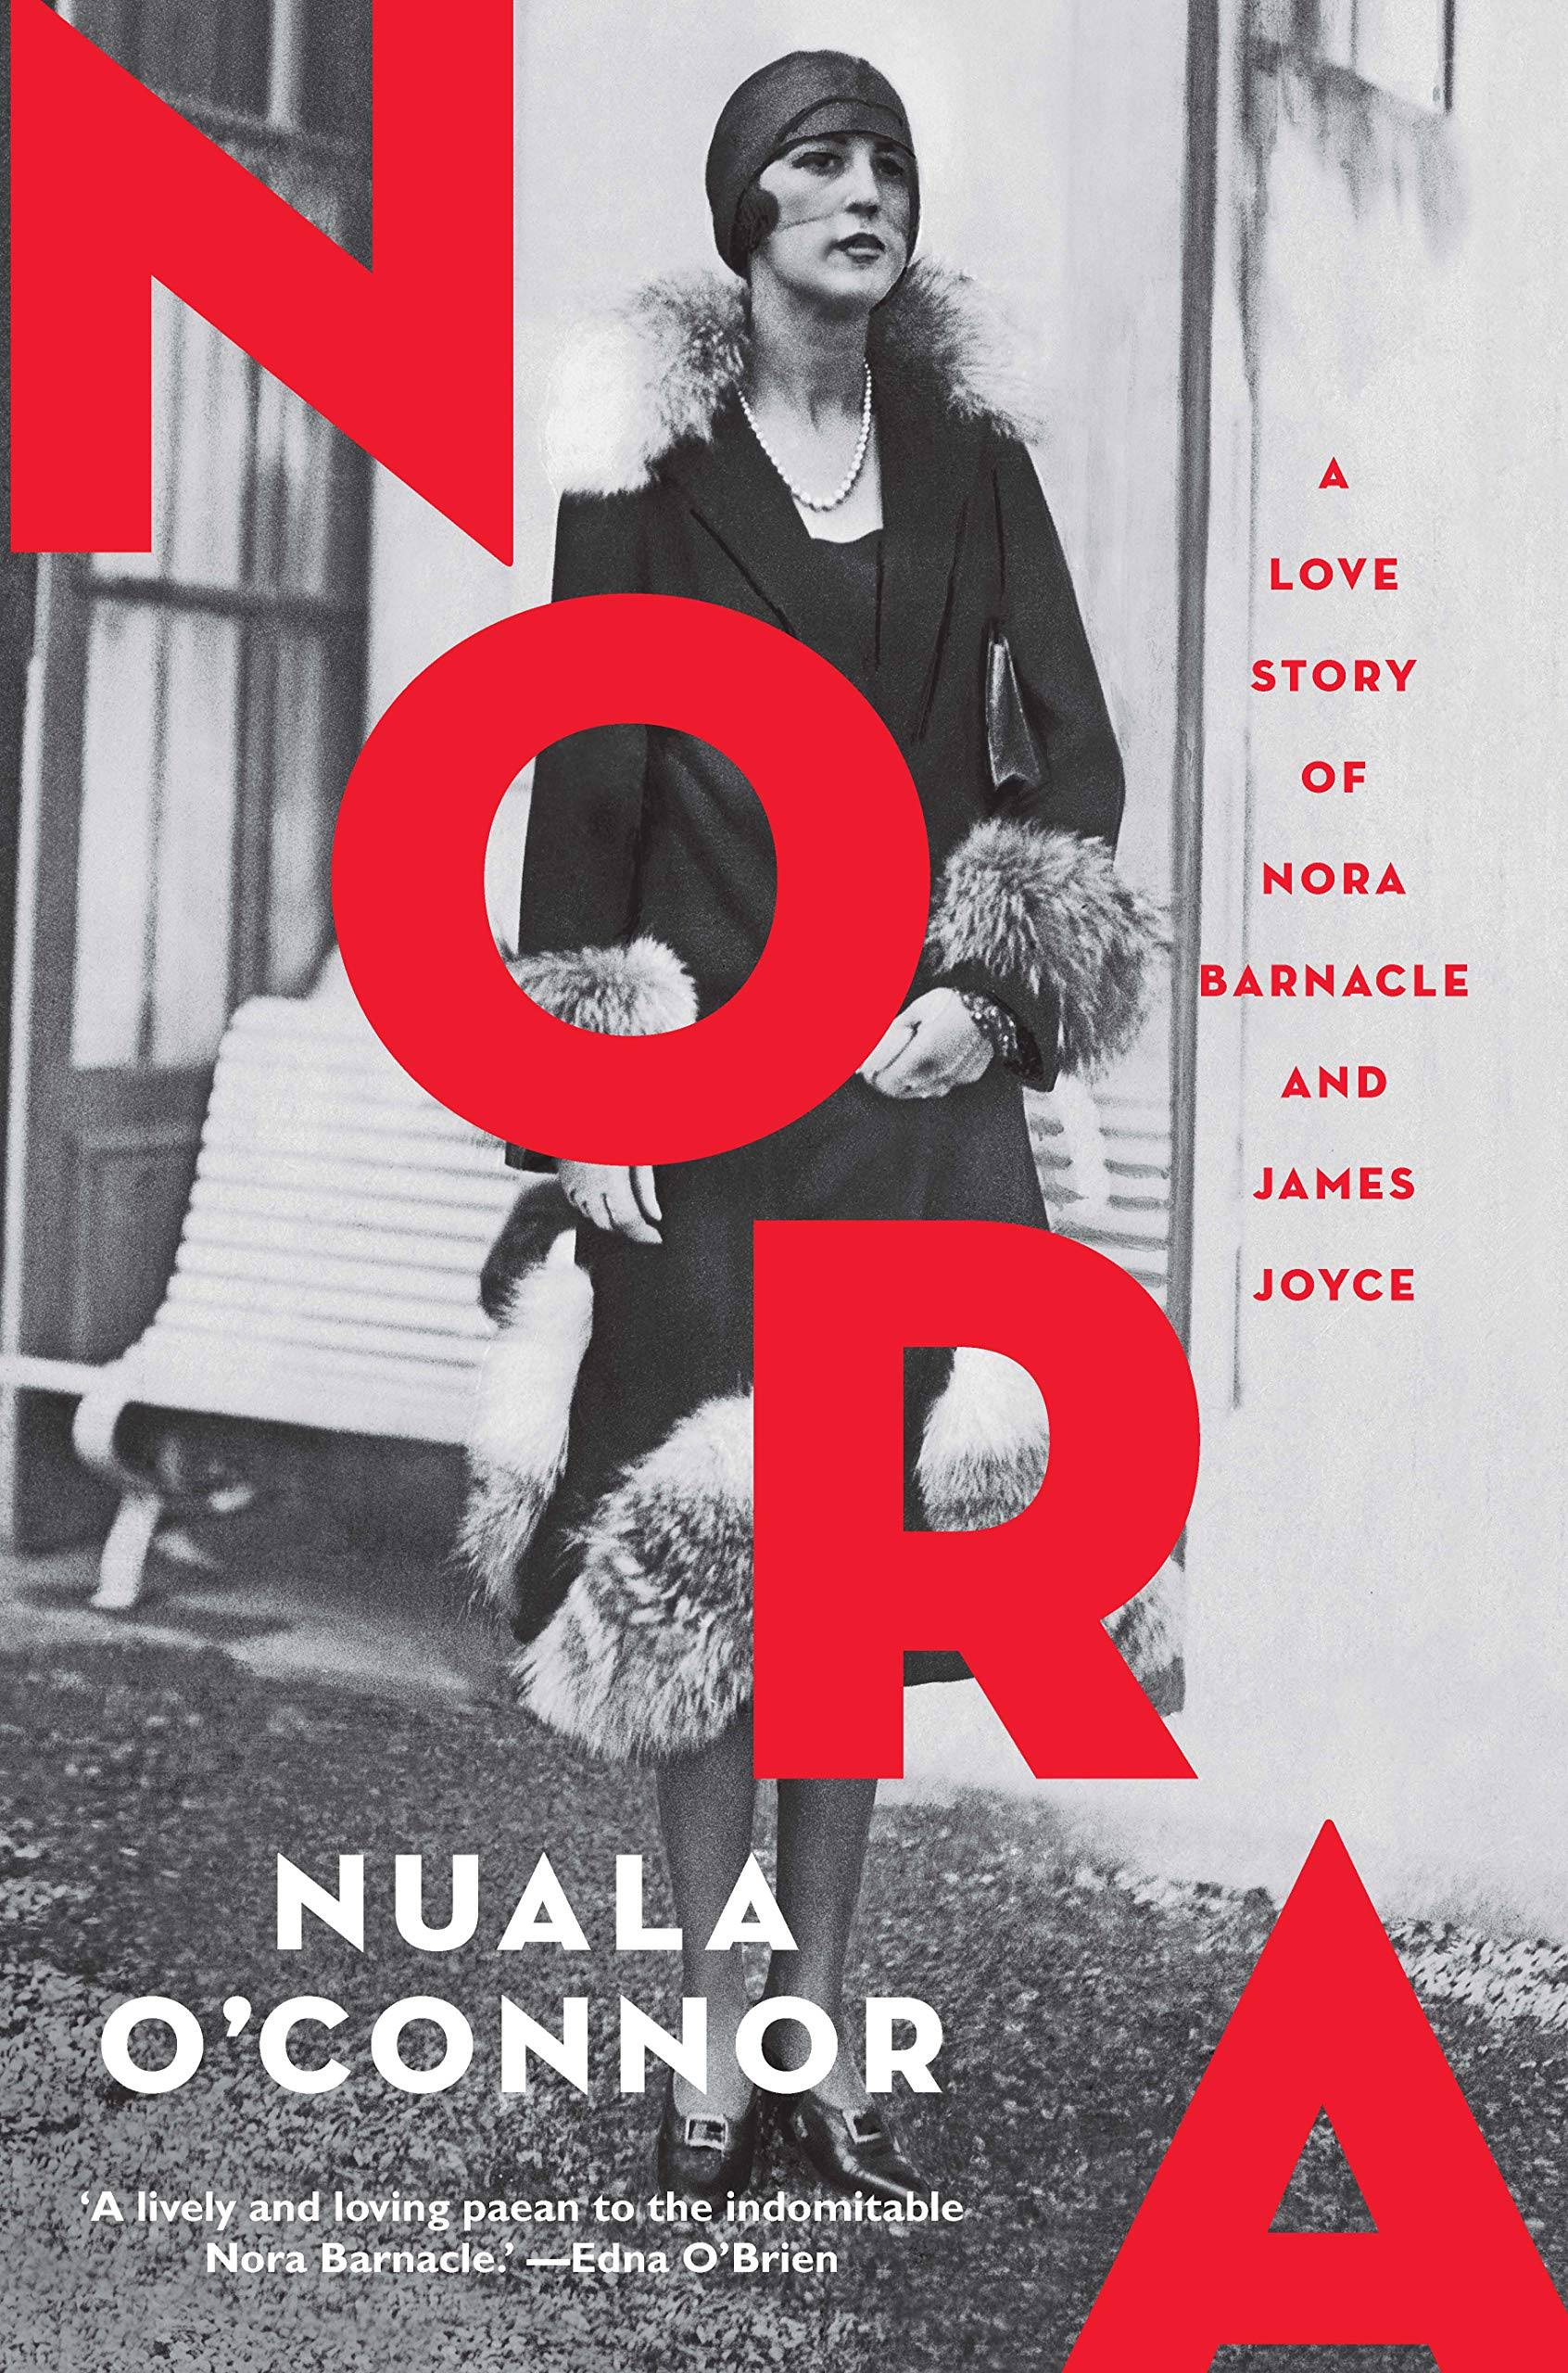 Nora: A Love Story of Nora Barnacle and James Joyce [Book]